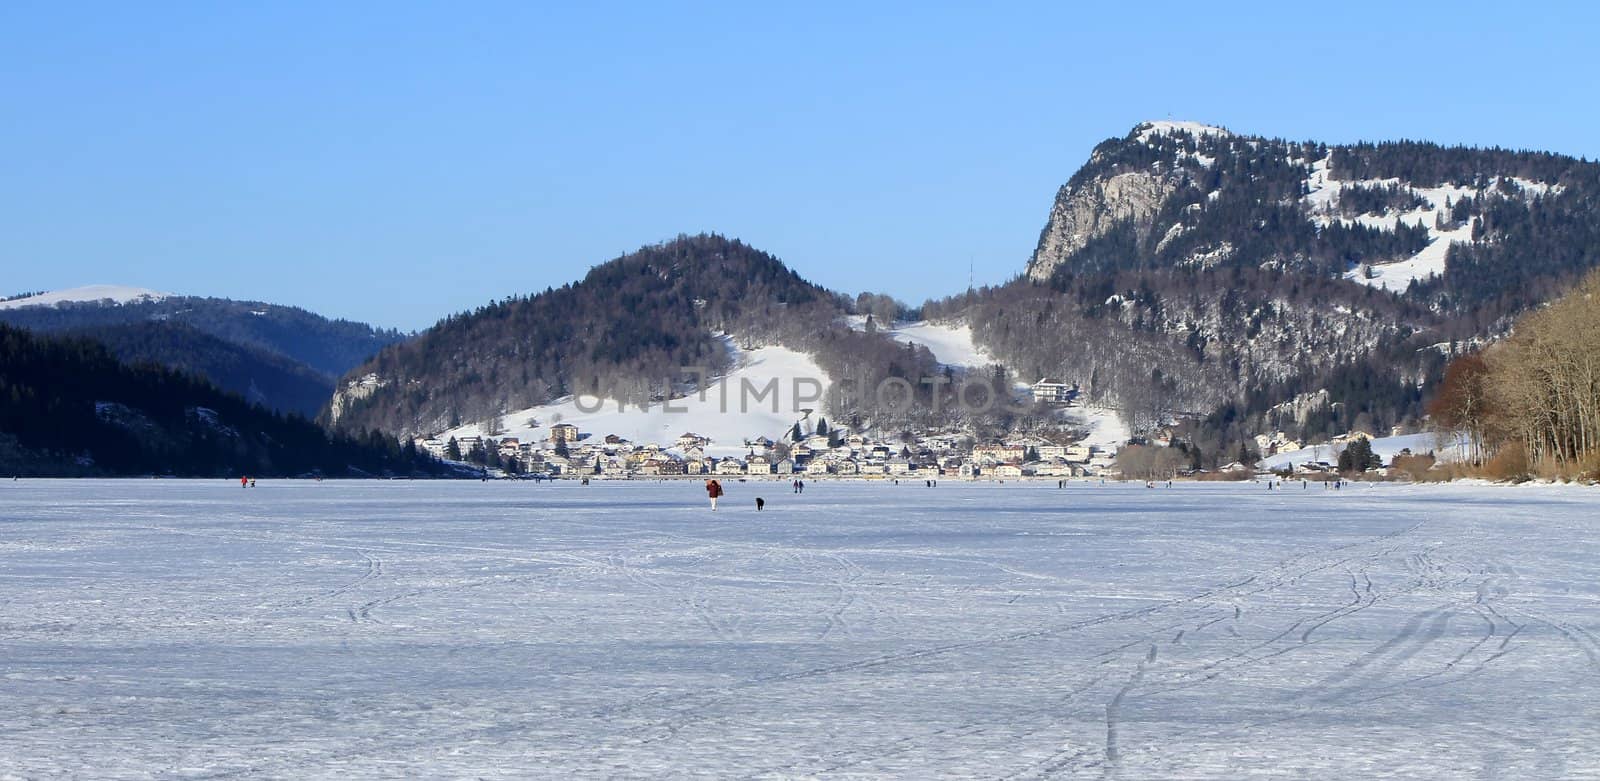 Frozen lake of the Joux valley and Le Pont village, Switzerland by Elenaphotos21